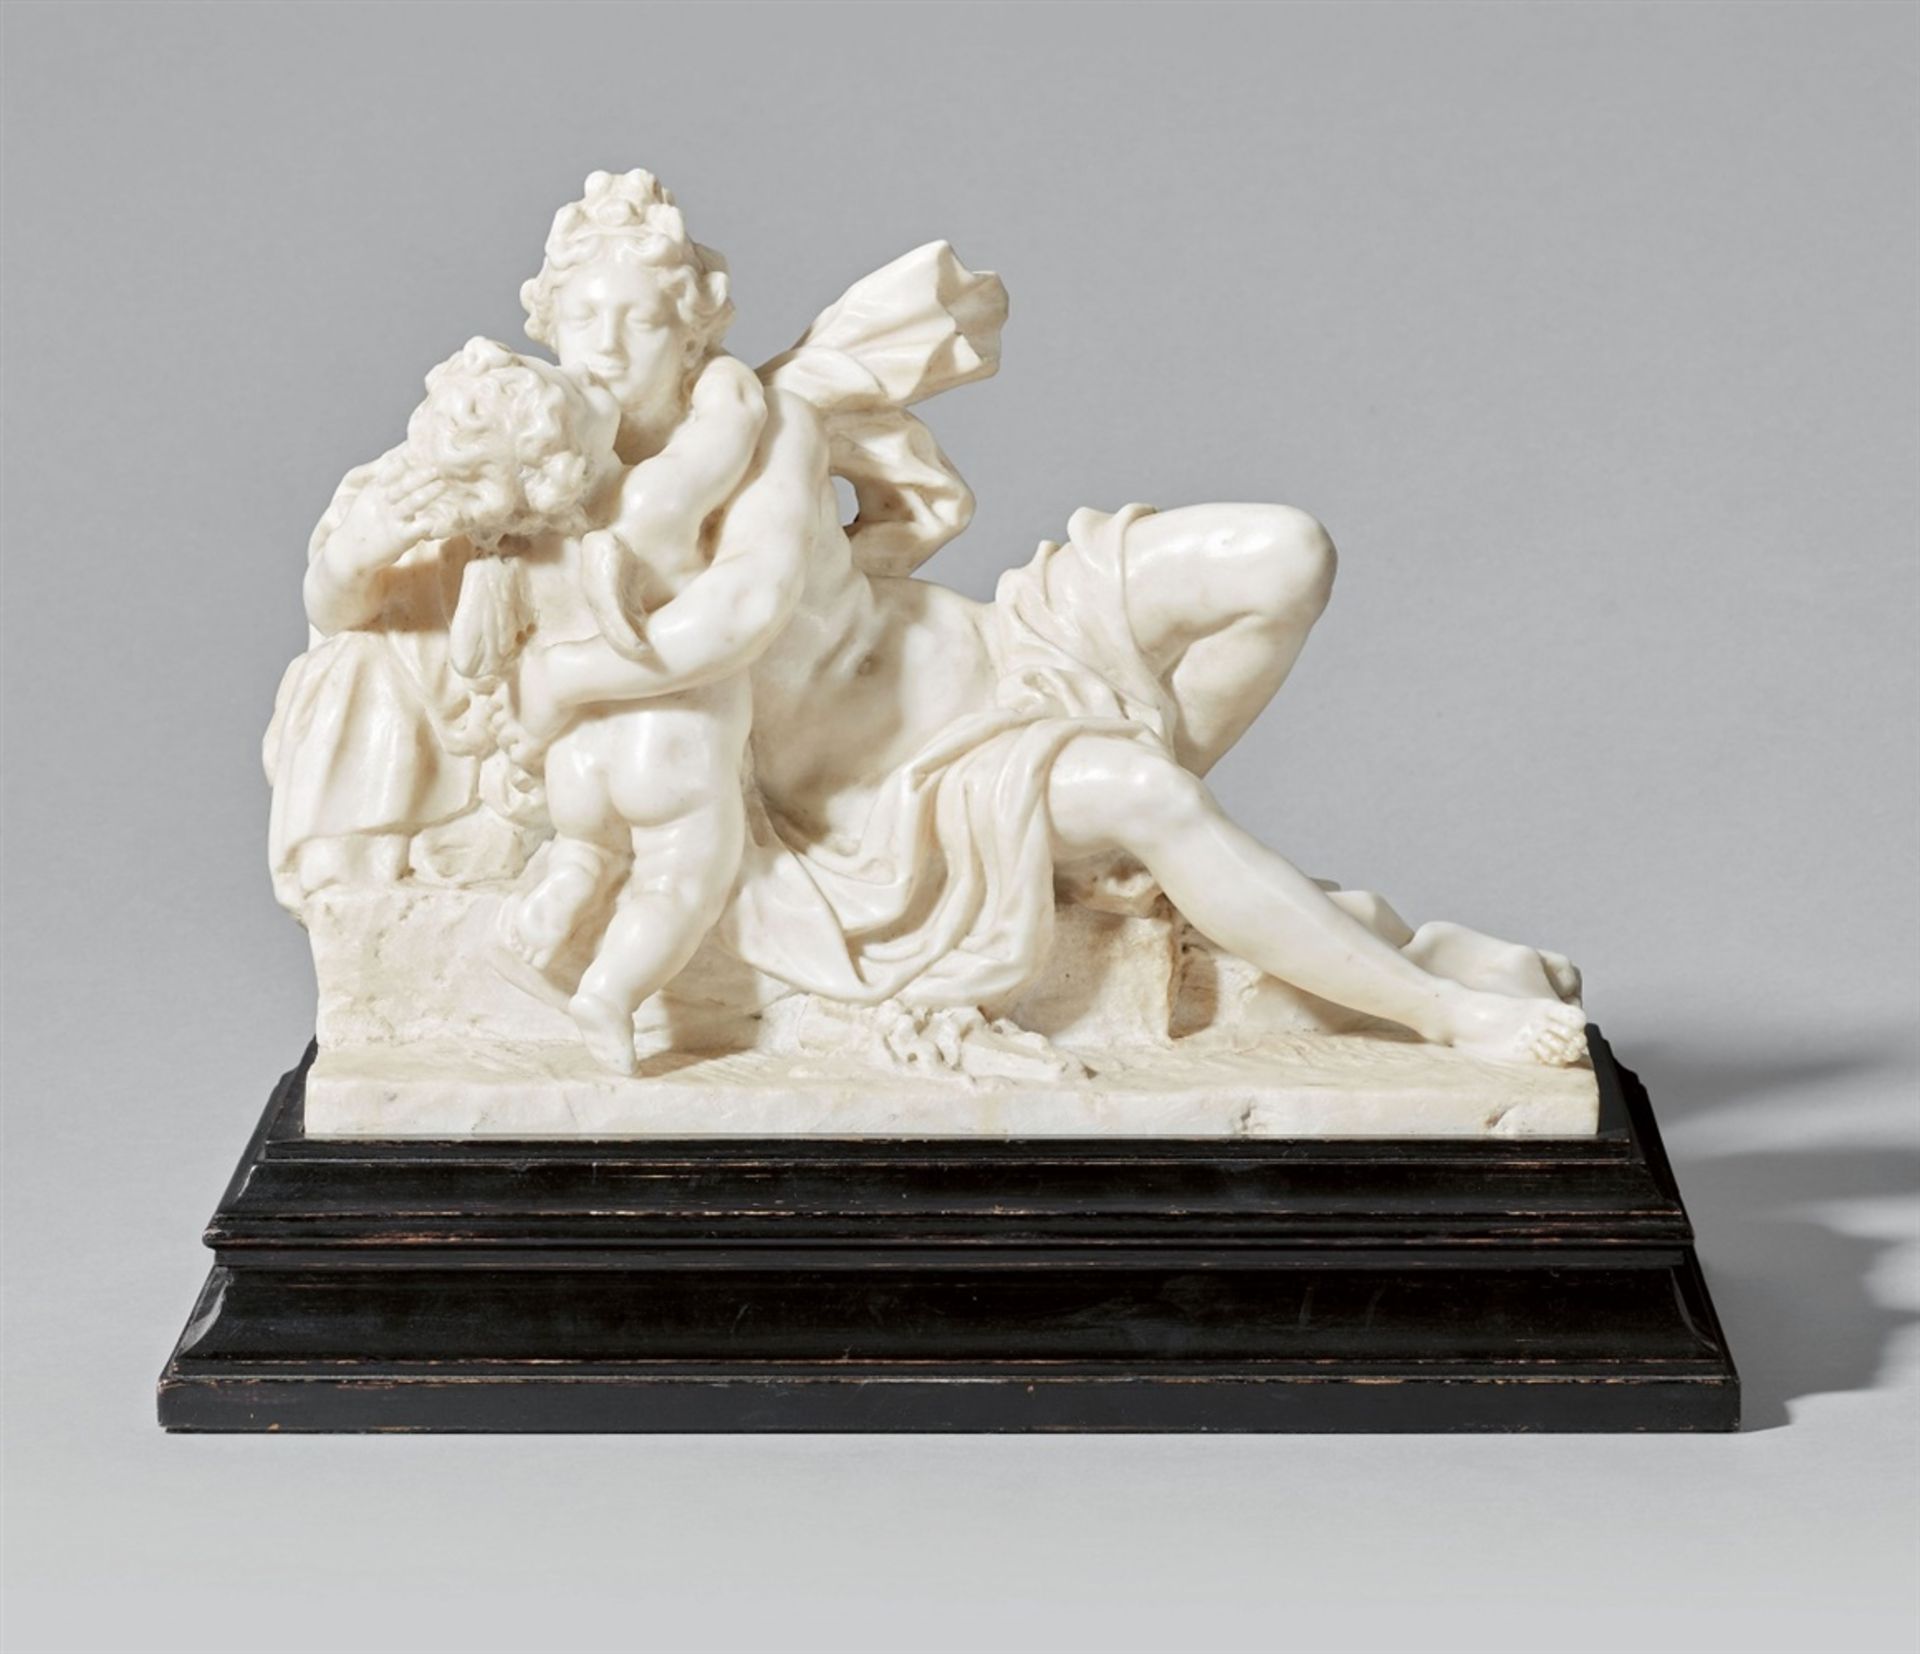 A white marble group of Venus and CupidOn an ebonised wood base. Venus is depicted with long flowing - Bild 2 aus 4